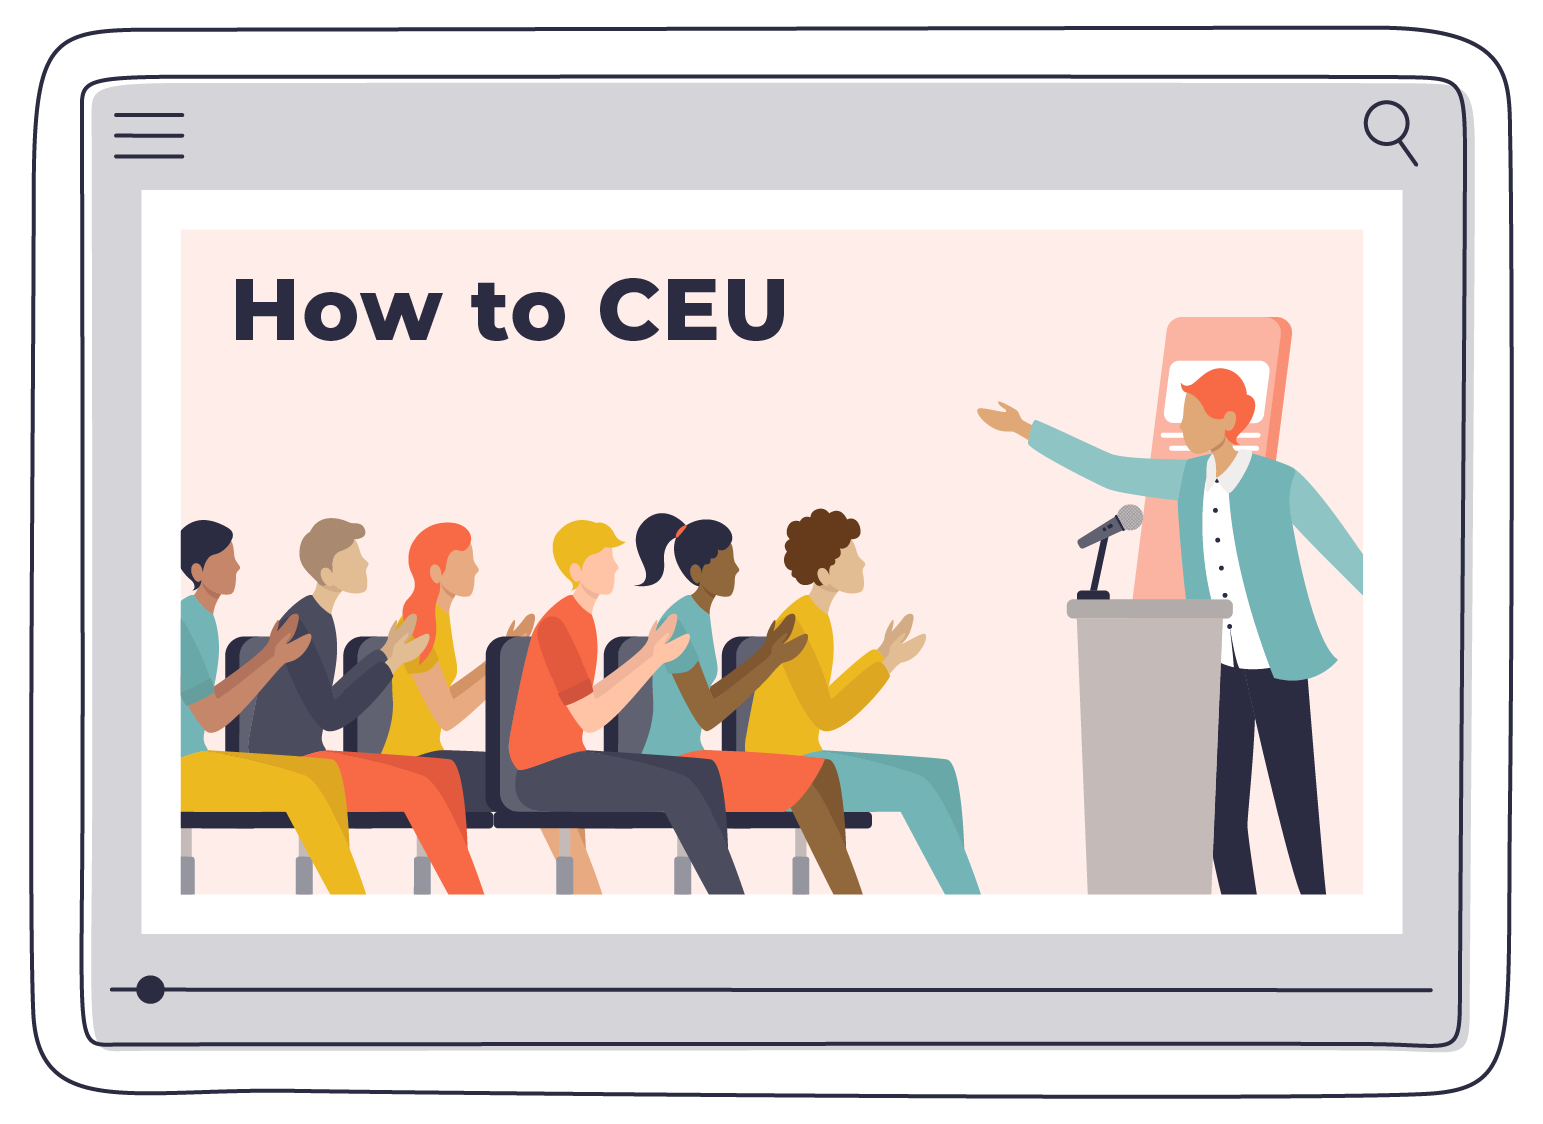 How to CEU eCourse for the Interiors Industry